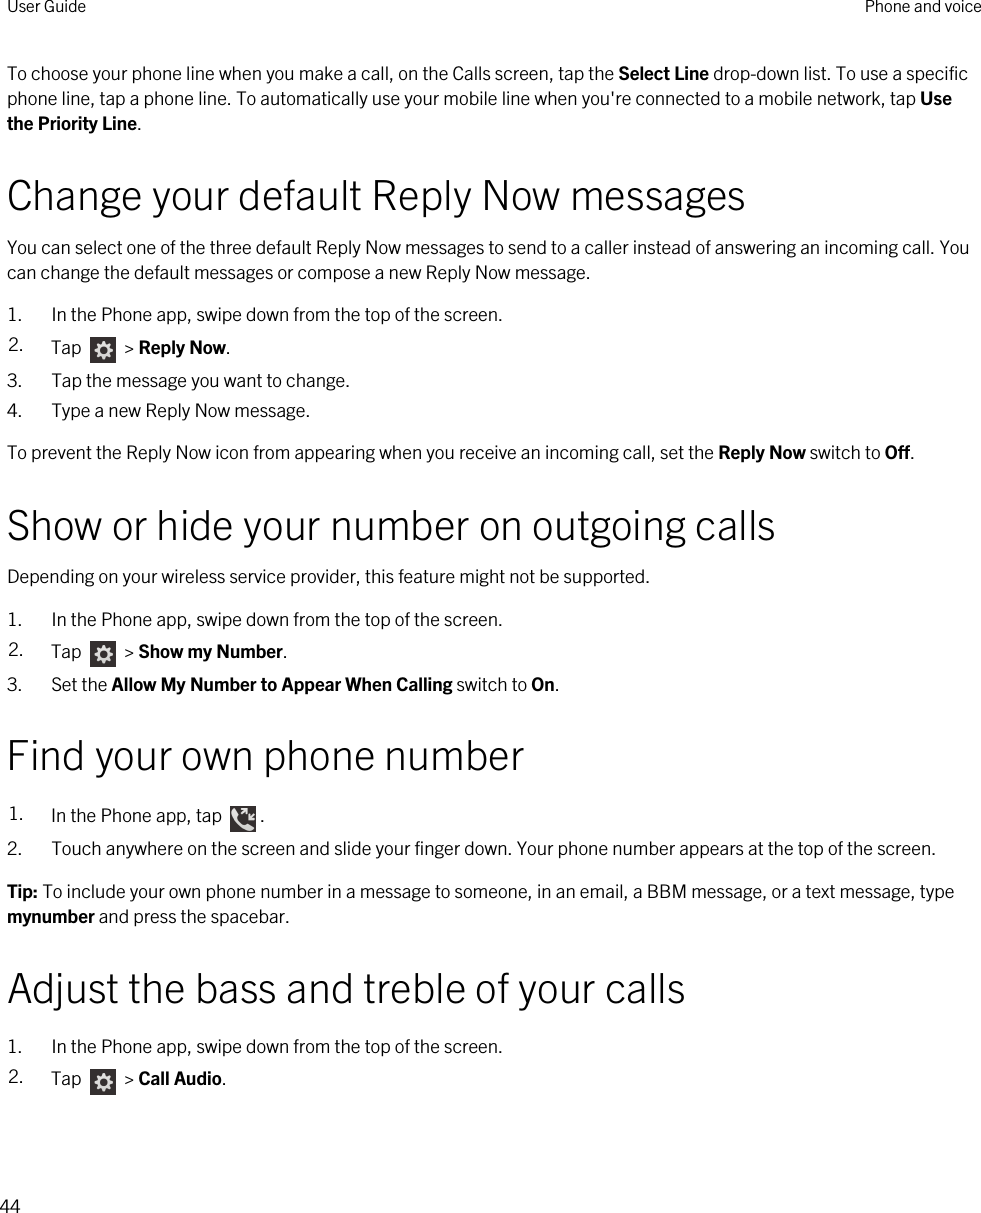 To choose your phone line when you make a call, on the Calls screen, tap the Select Line drop-down list. To use a specific phone line, tap a phone line. To automatically use your mobile line when you&apos;re connected to a mobile network, tap Use the Priority Line.Change your default Reply Now messagesYou can select one of the three default Reply Now messages to send to a caller instead of answering an incoming call. You can change the default messages or compose a new Reply Now message.1. In the Phone app, swipe down from the top of the screen.2. Tap   &gt; Reply Now.3. Tap the message you want to change.4. Type a new Reply Now message.To prevent the Reply Now icon from appearing when you receive an incoming call, set the Reply Now switch to Off.Show or hide your number on outgoing callsDepending on your wireless service provider, this feature might not be supported. 1. In the Phone app, swipe down from the top of the screen.2. Tap   &gt; Show my Number.3. Set the Allow My Number to Appear When Calling switch to On.Find your own phone number1. In the Phone app, tap  .2. Touch anywhere on the screen and slide your finger down. Your phone number appears at the top of the screen.Tip: To include your own phone number in a message to someone, in an email, a BBM message, or a text message, type mynumber and press the spacebar.Adjust the bass and treble of your calls1. In the Phone app, swipe down from the top of the screen.2. Tap   &gt; Call Audio.User Guide Phone and voice44